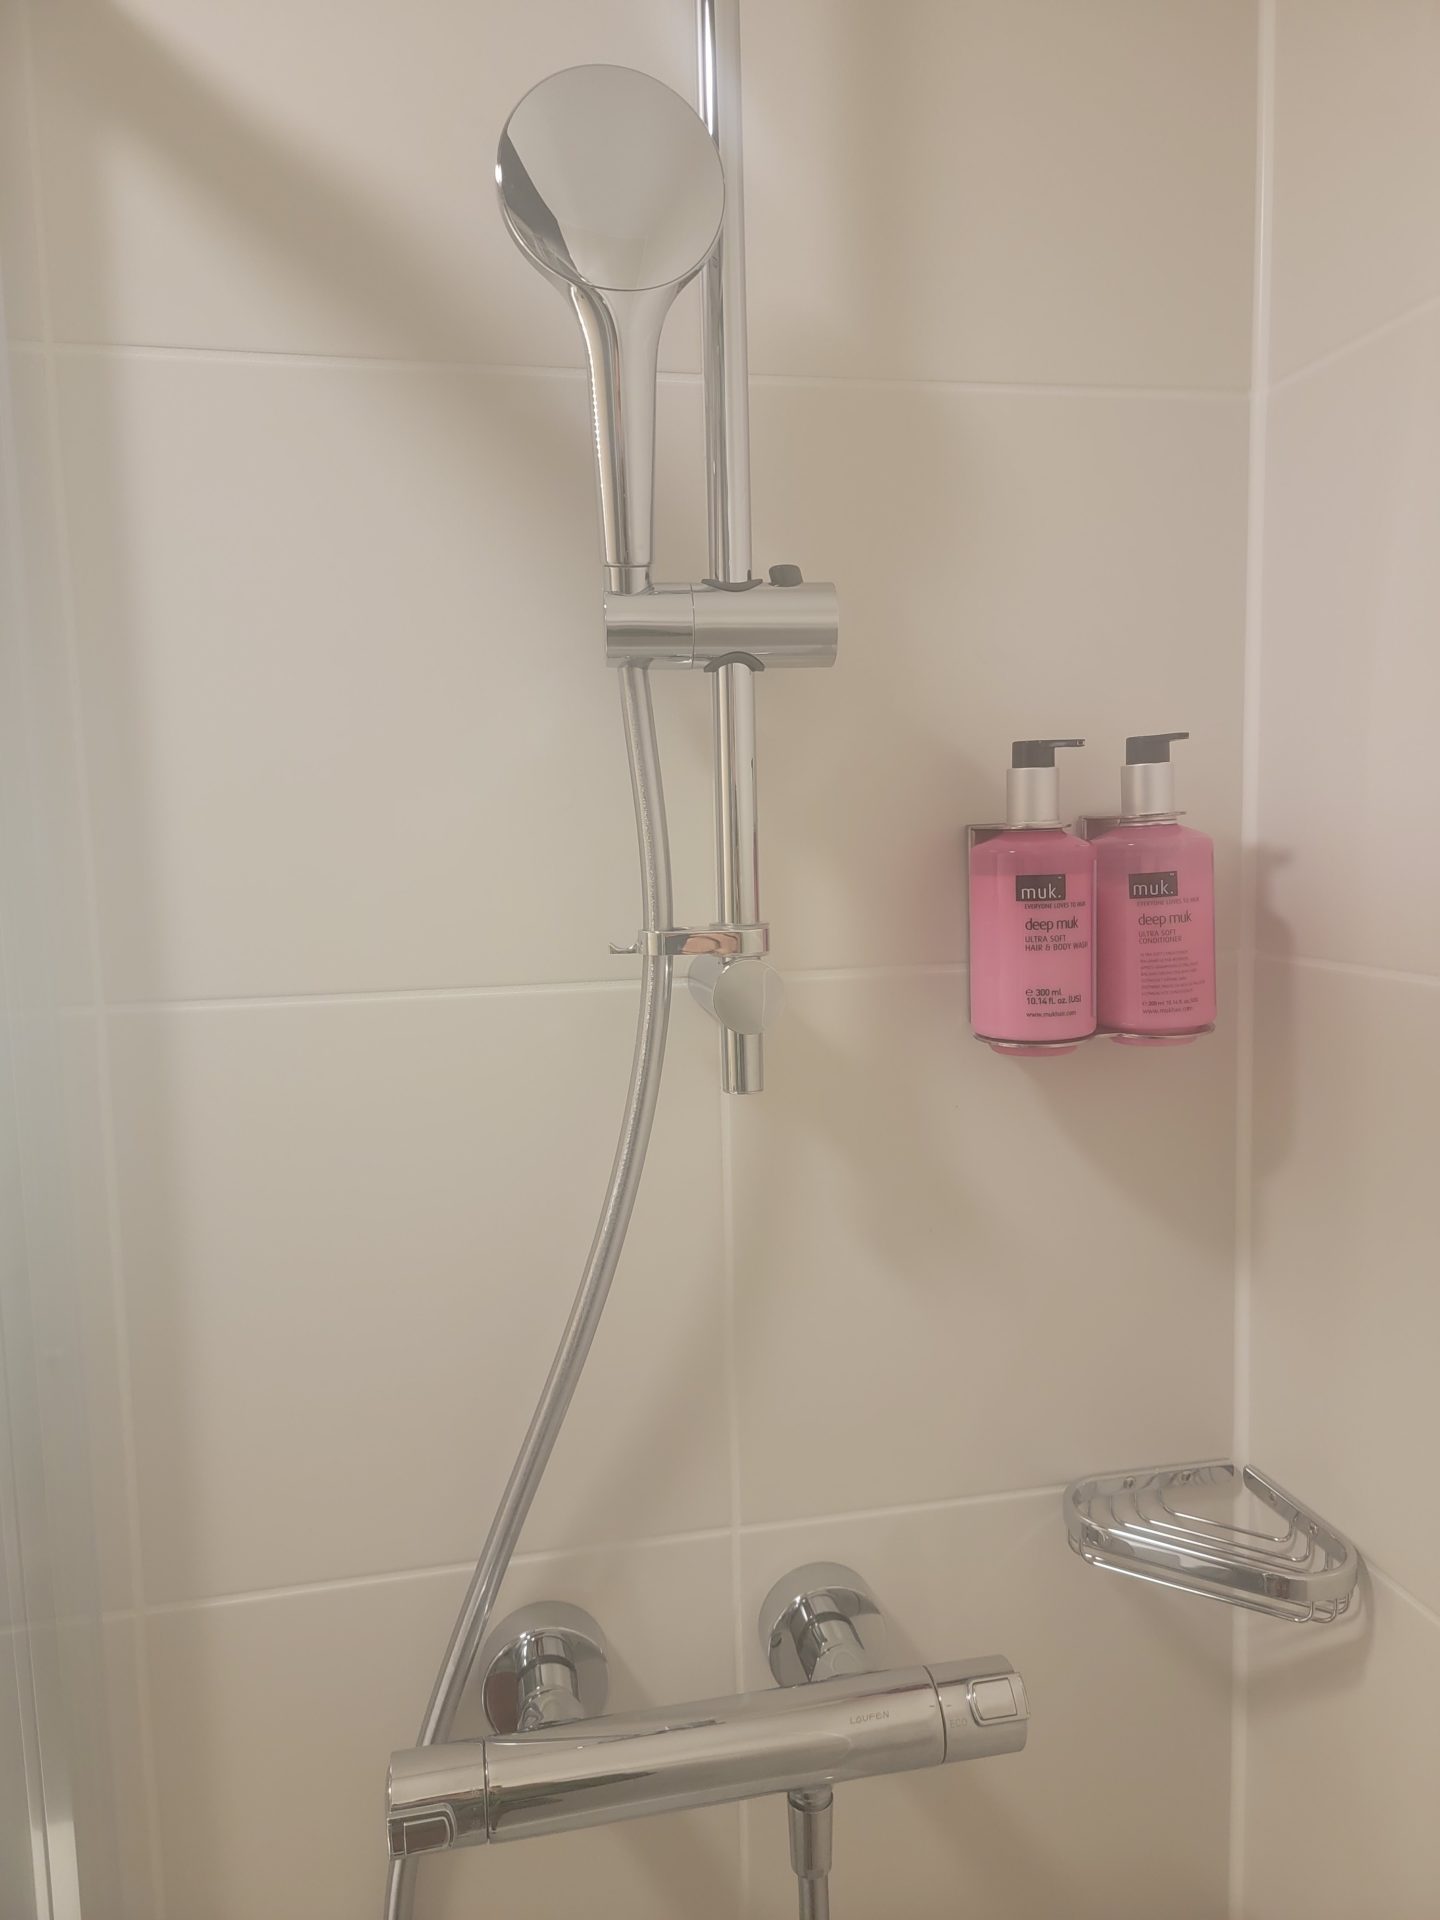 a shower head and faucet with pink bottles of shampoo